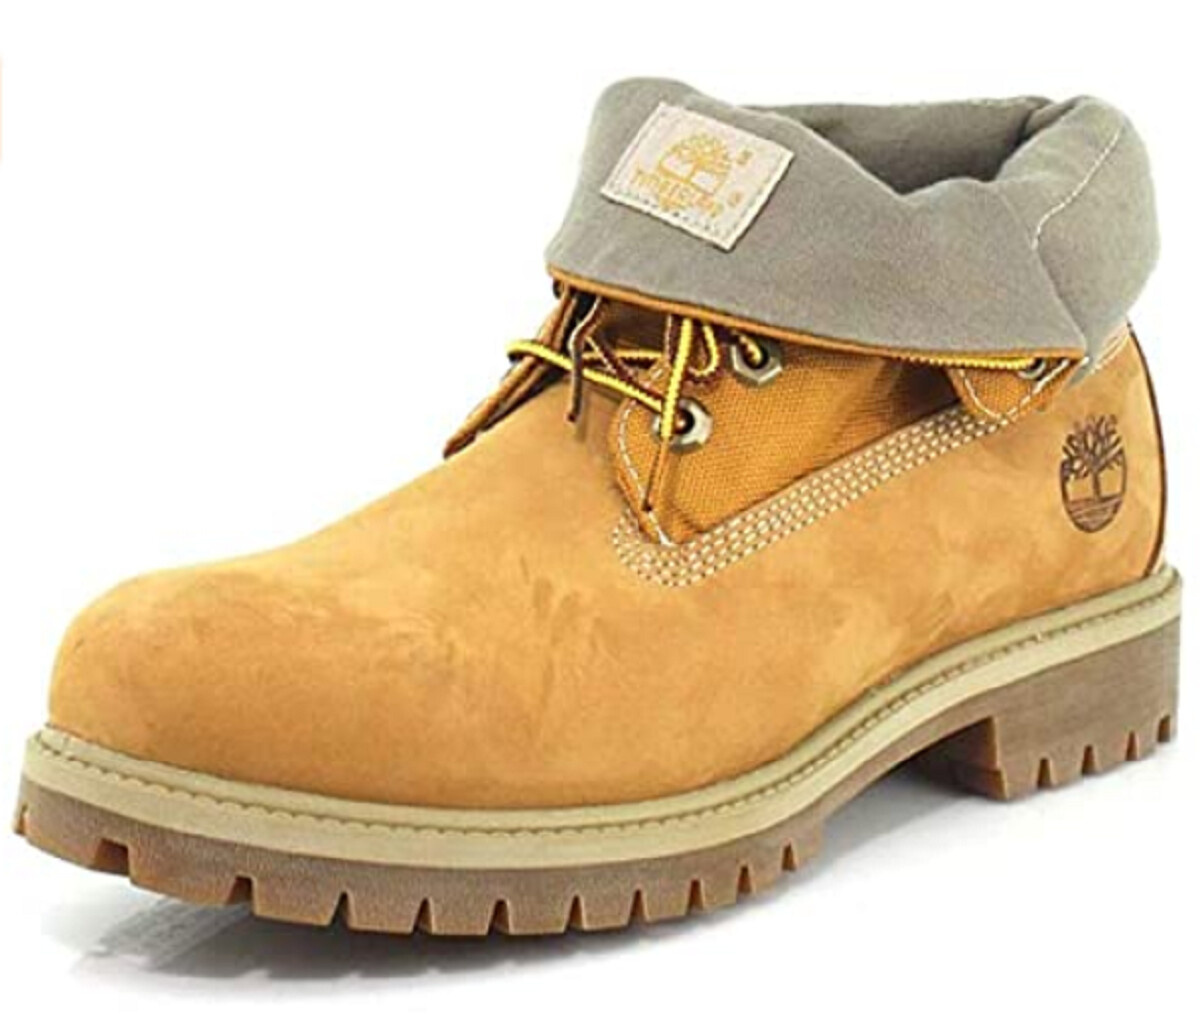 Timberland Men's Icon Collection Single Roll-top Ankle Boot Men's Size 14 -  #UNPAIR